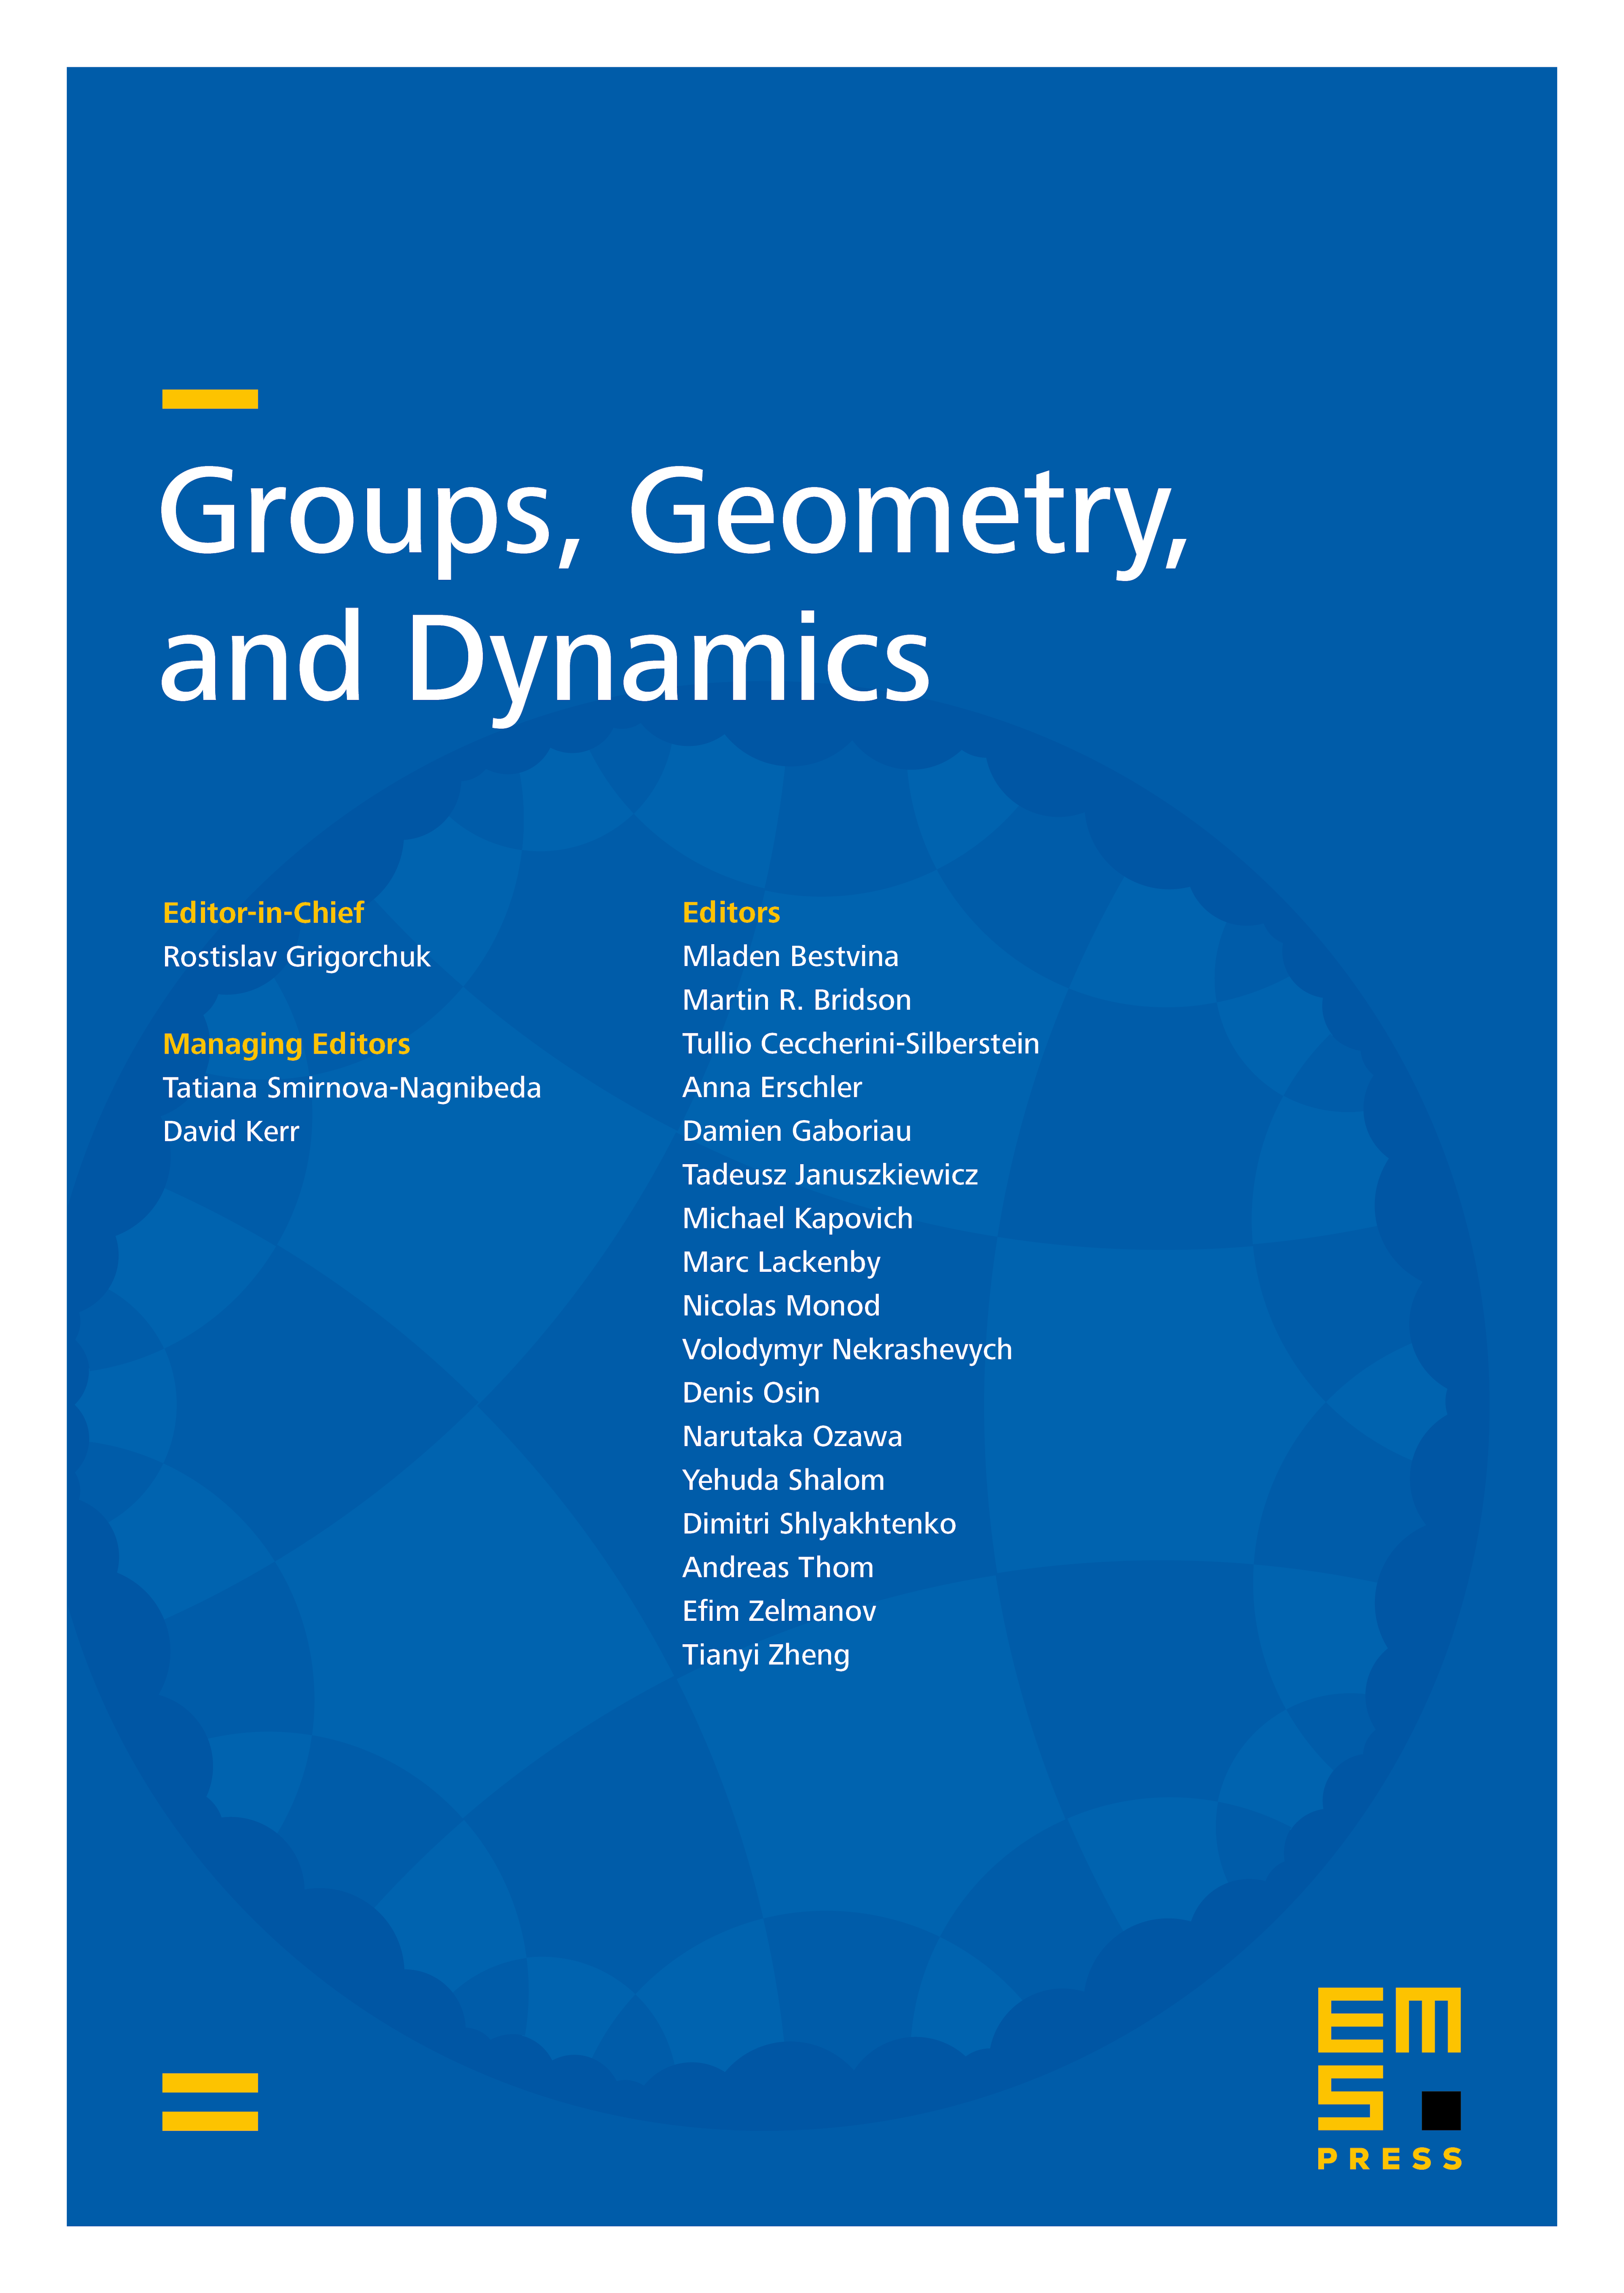 Relatively extra-large Artin groups cover